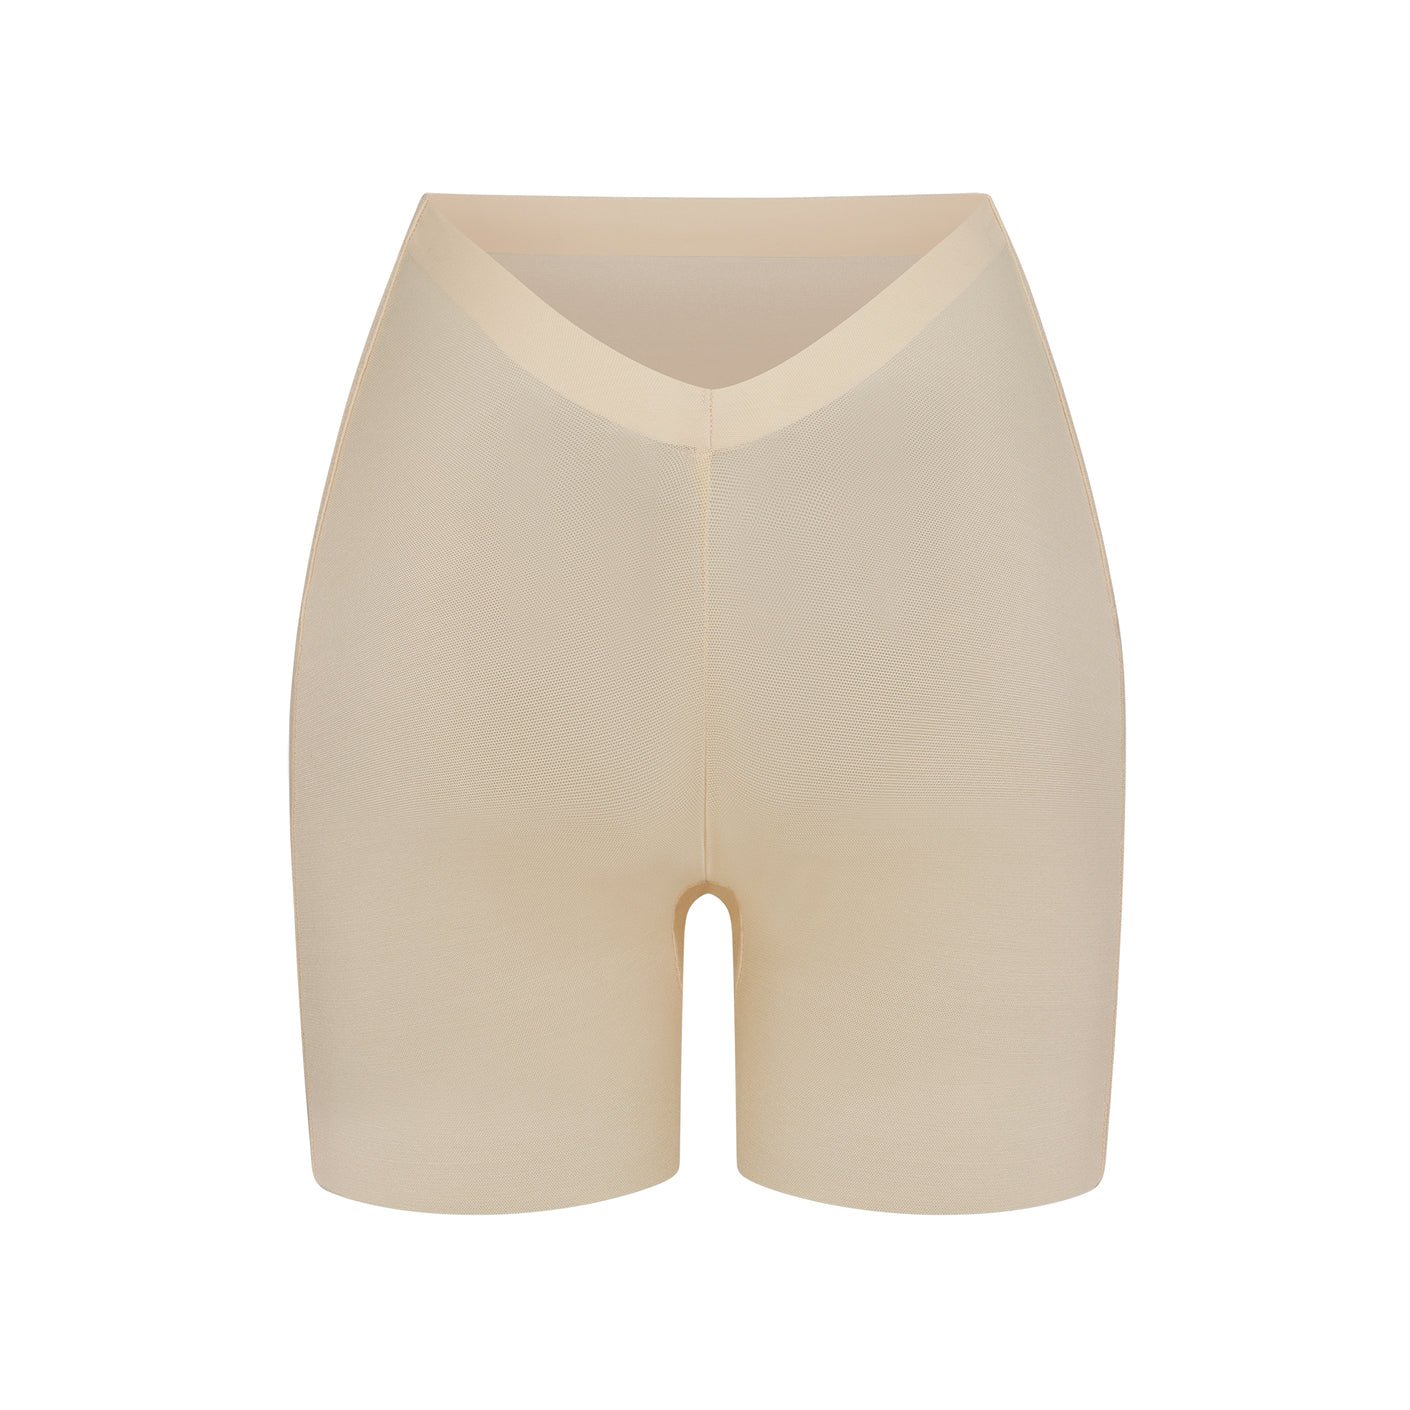 ISO SKIMS low back shapewear shorts size S or M… please help : r